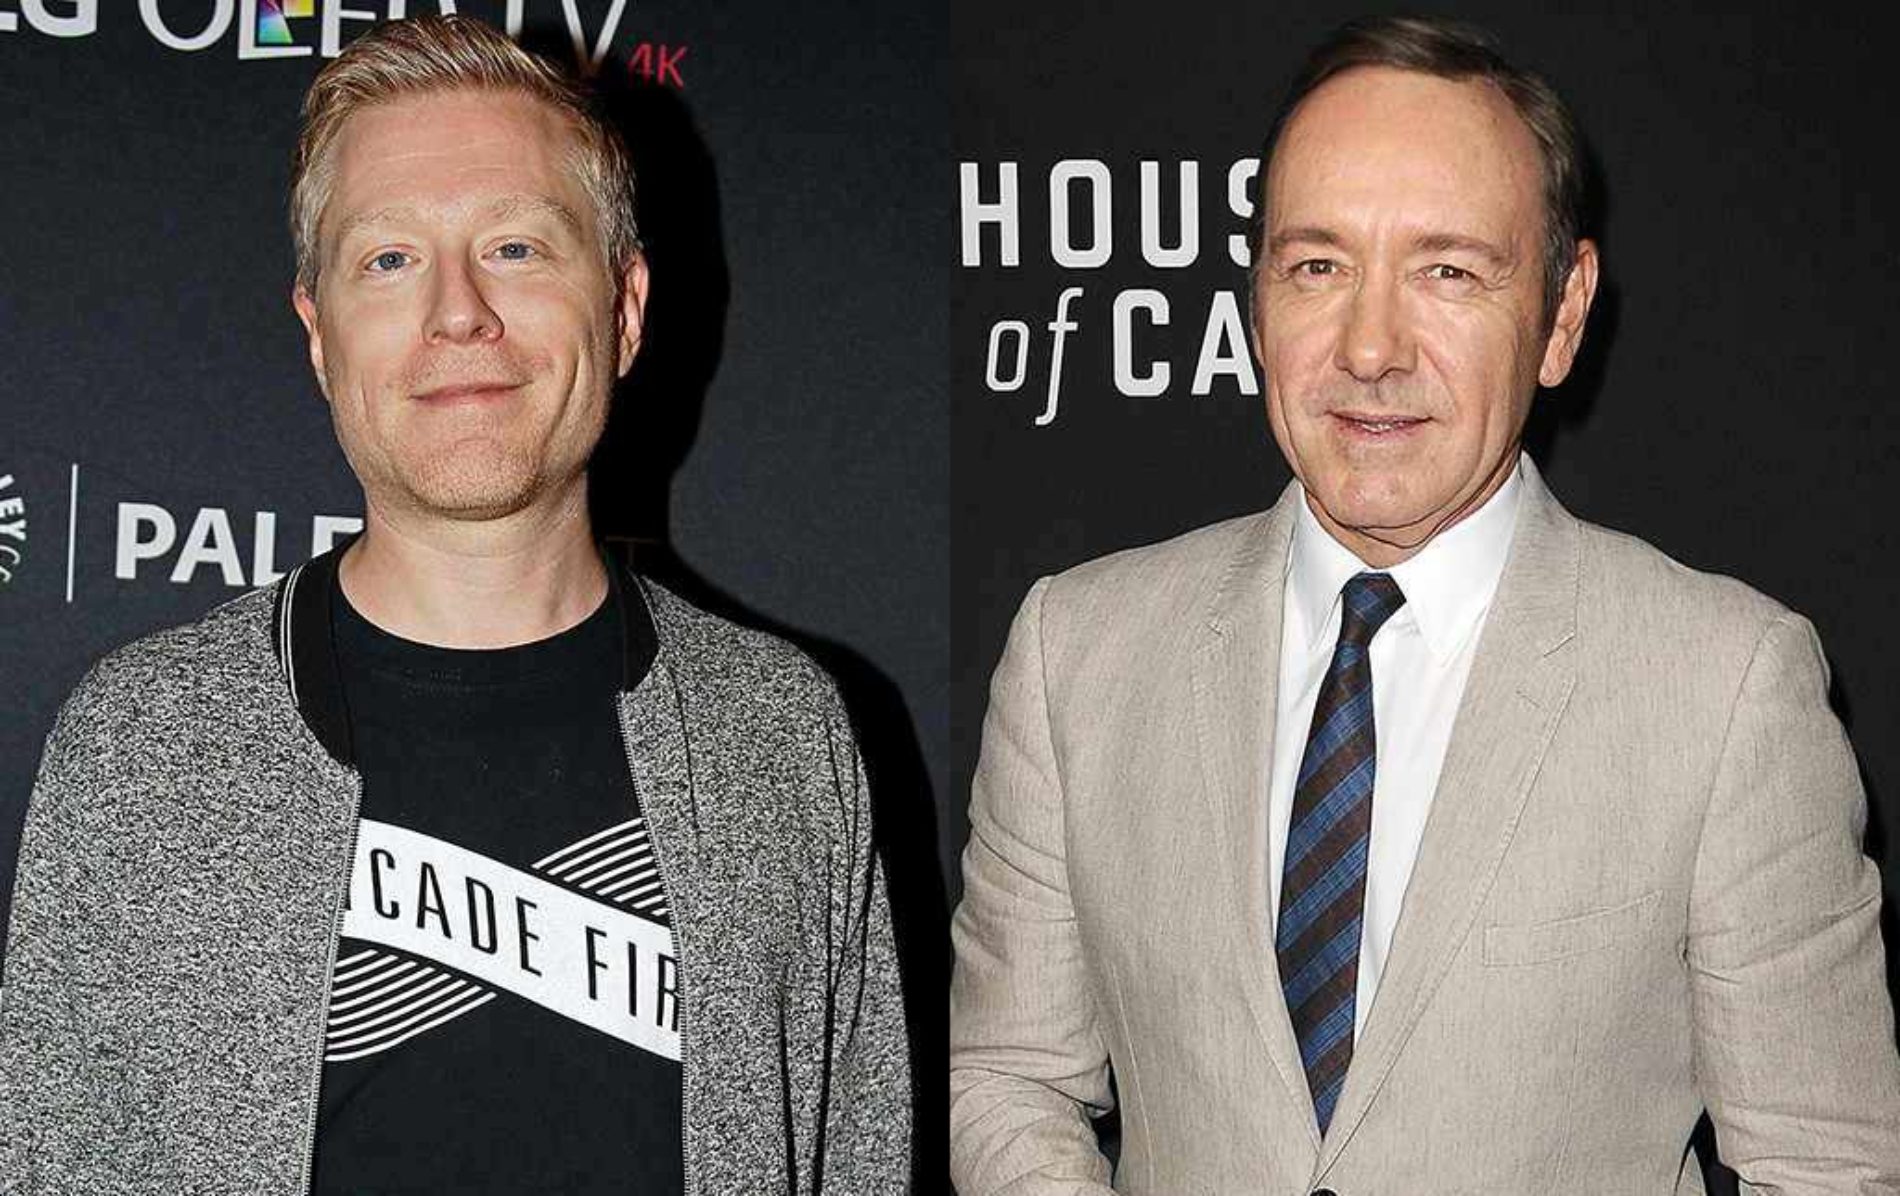 Kevin Spacey comes out as gay following accusation of sexual assault from actor Anthony Rapp